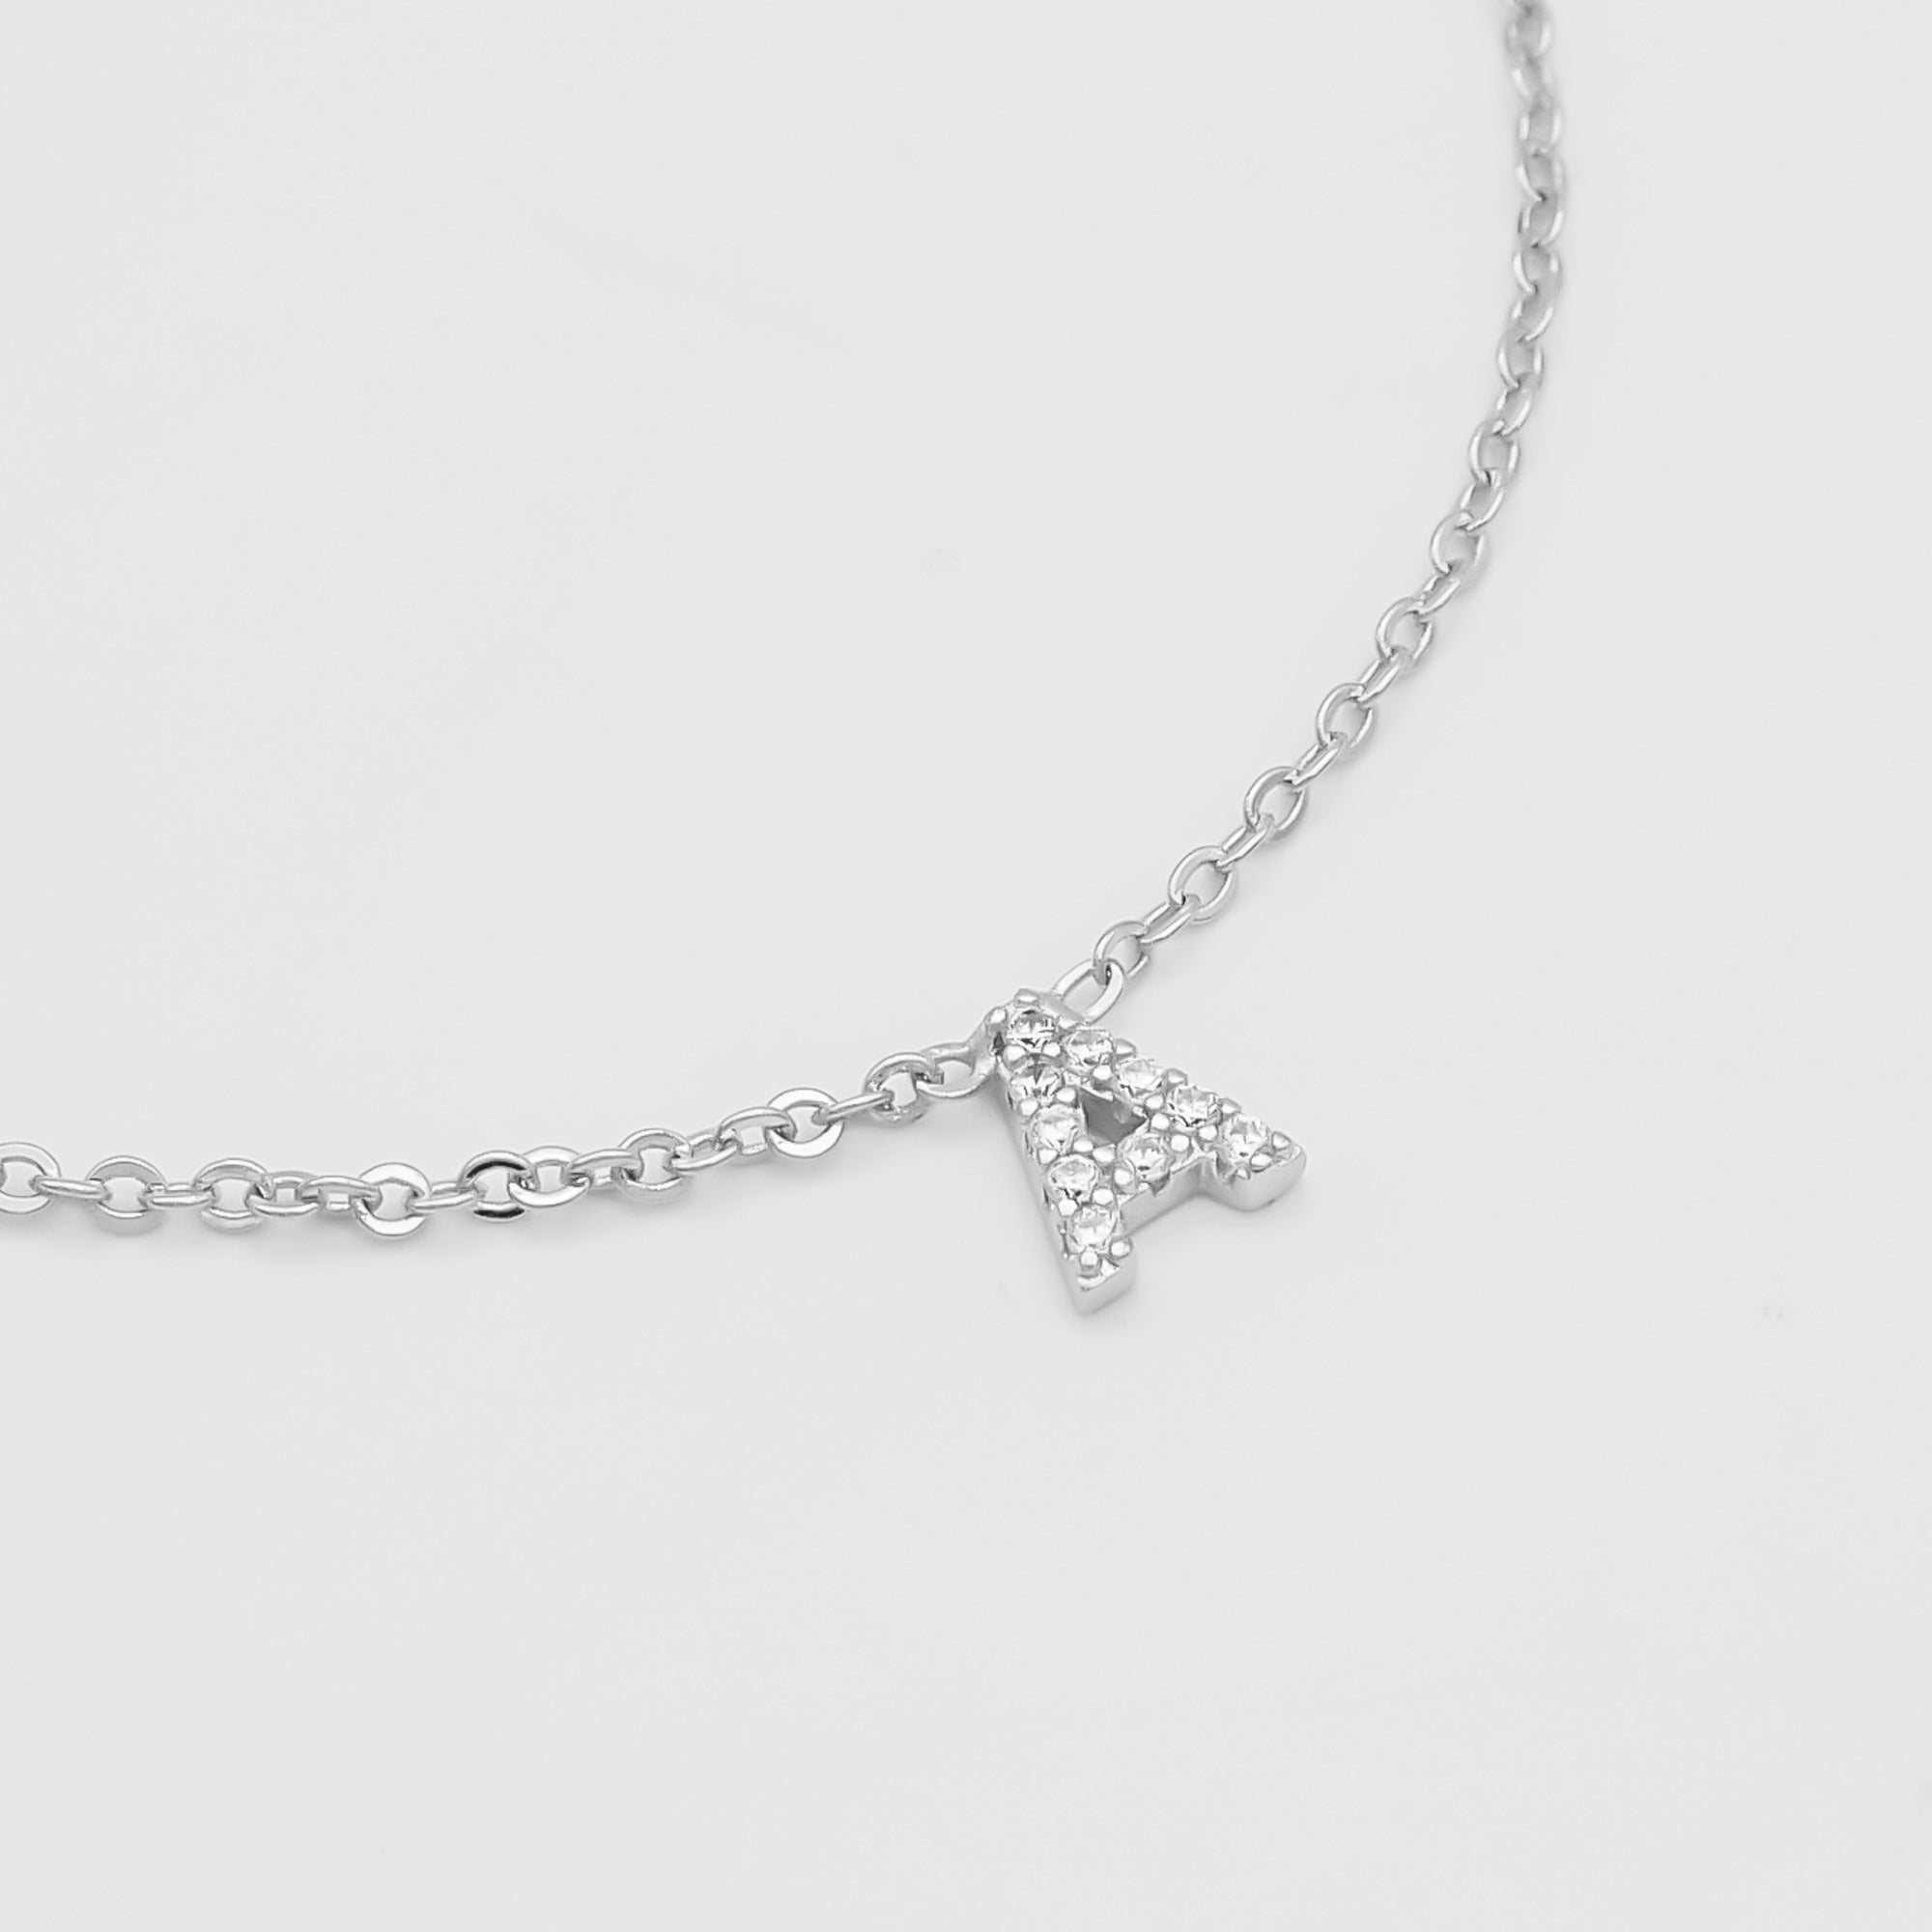 Lana ICY Initial Necklace